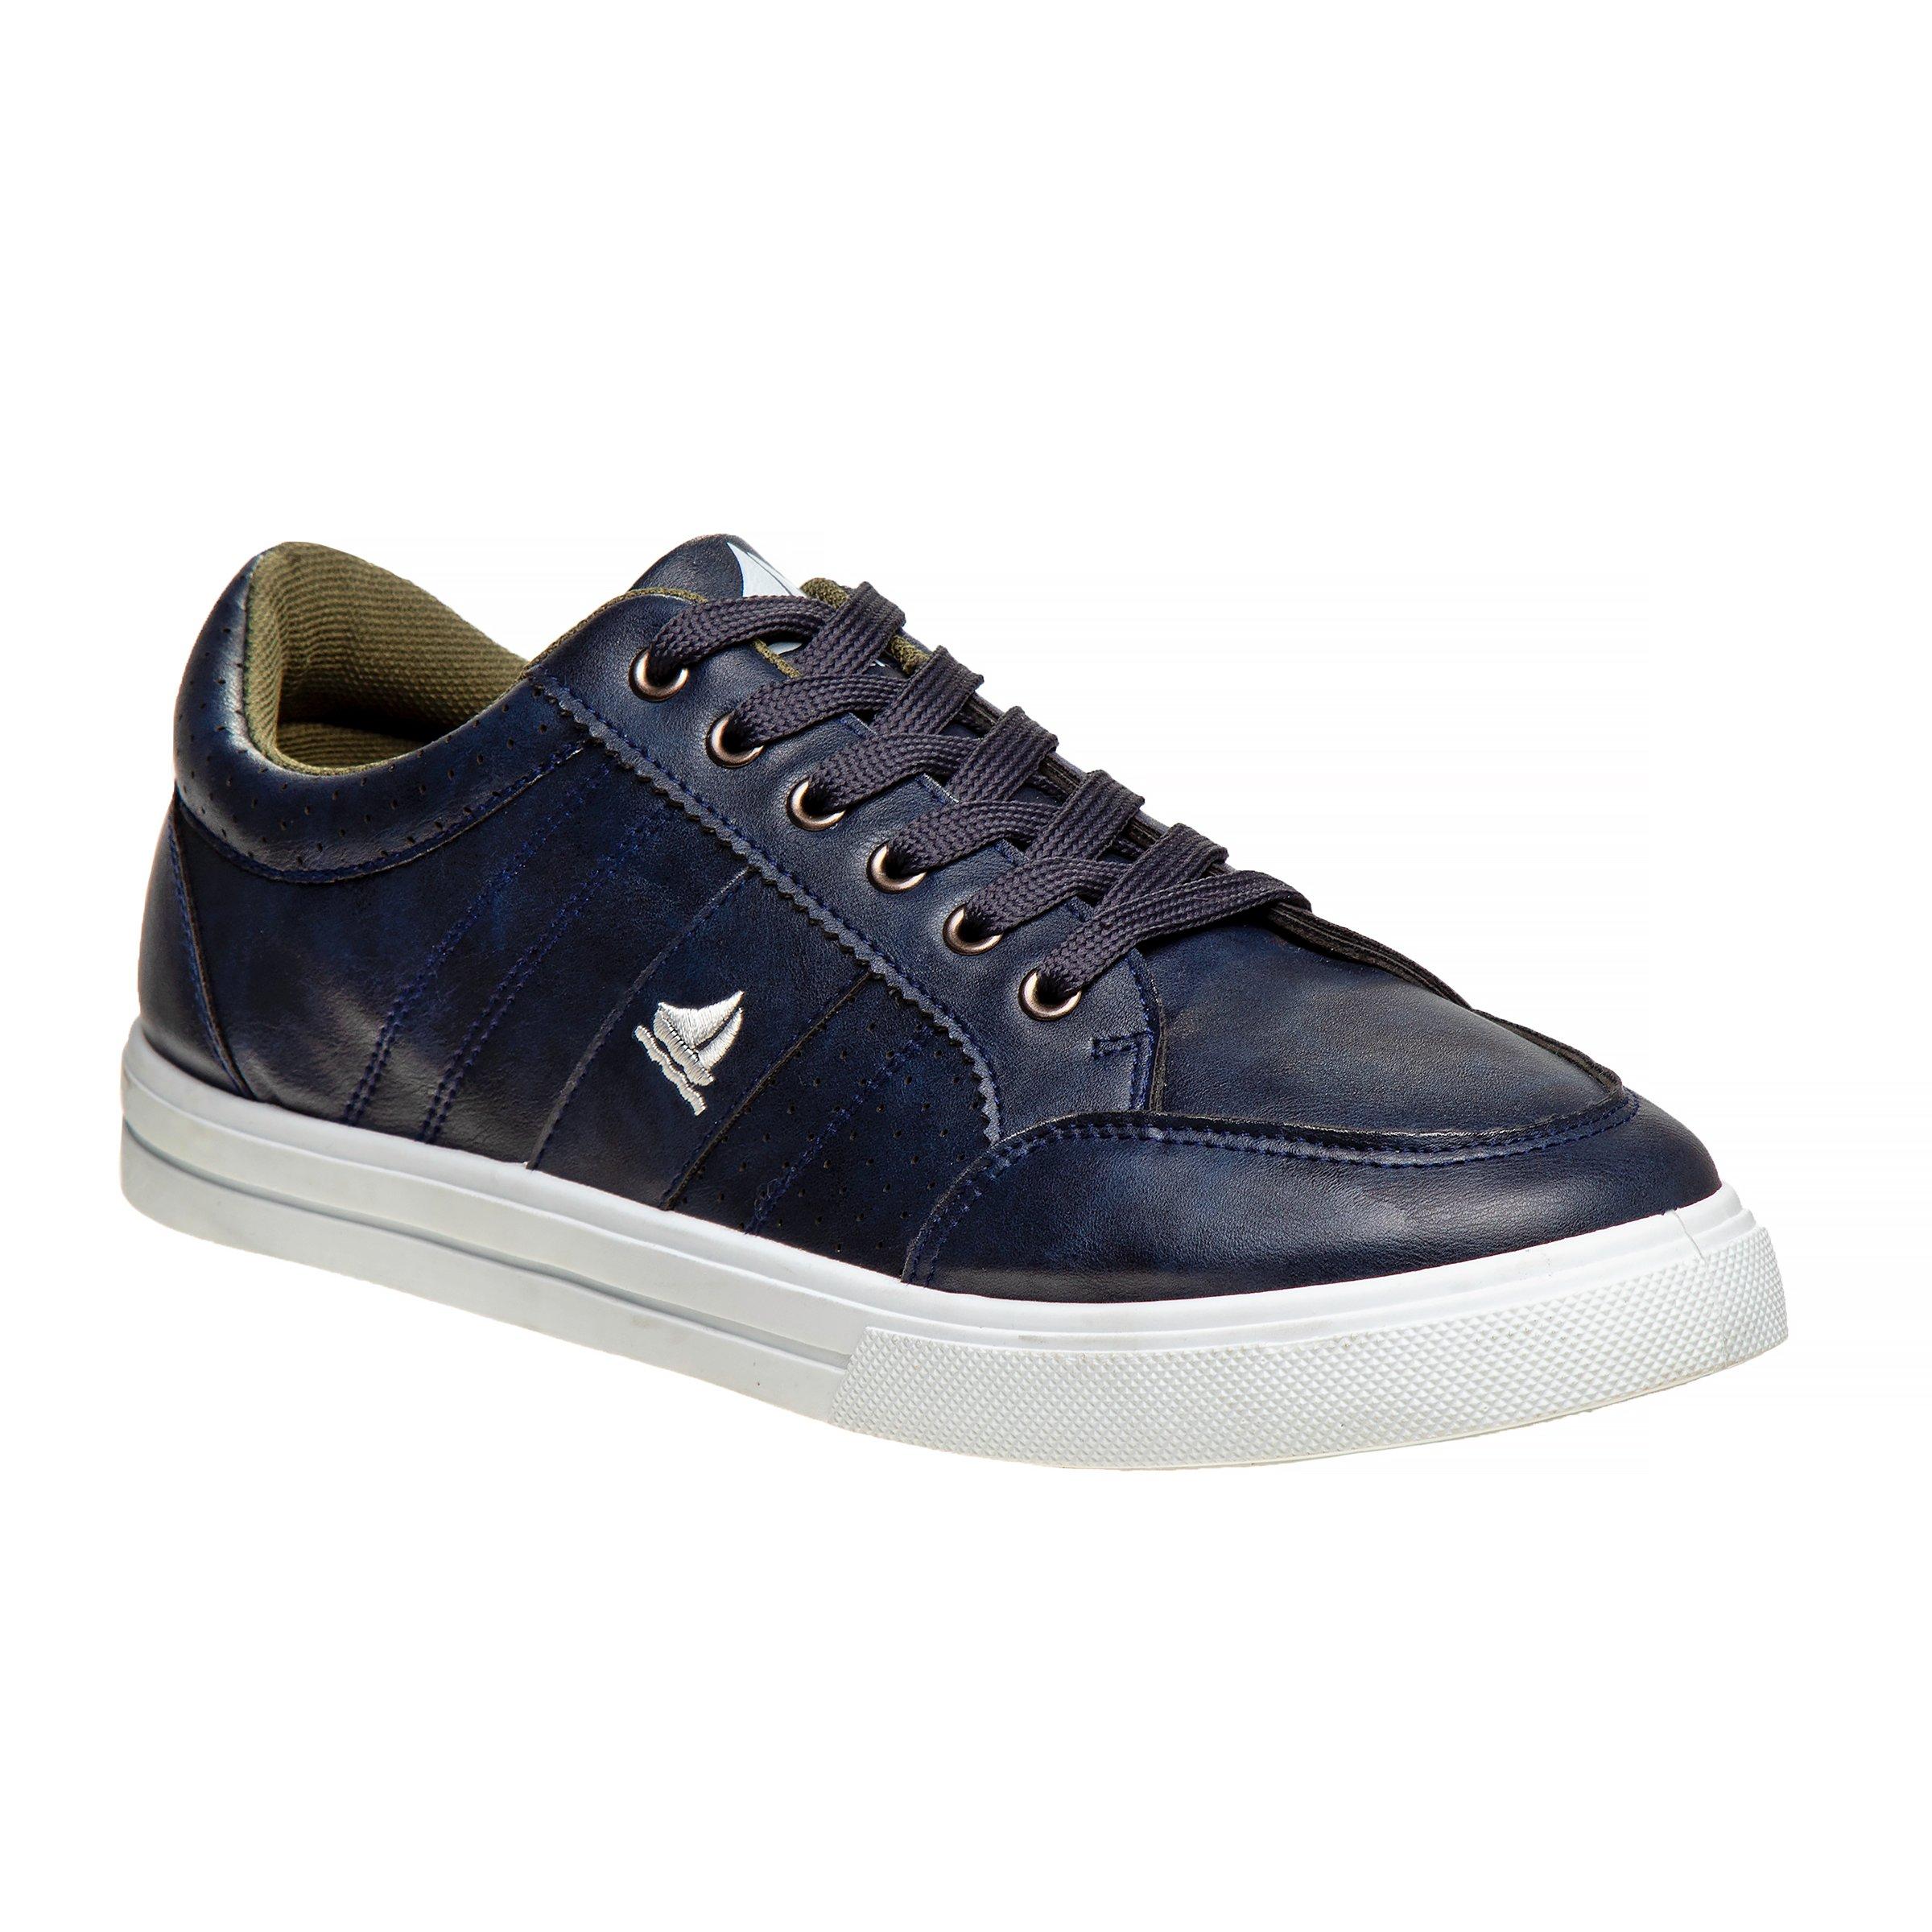 Men's Sail Lace-Up Sneakers